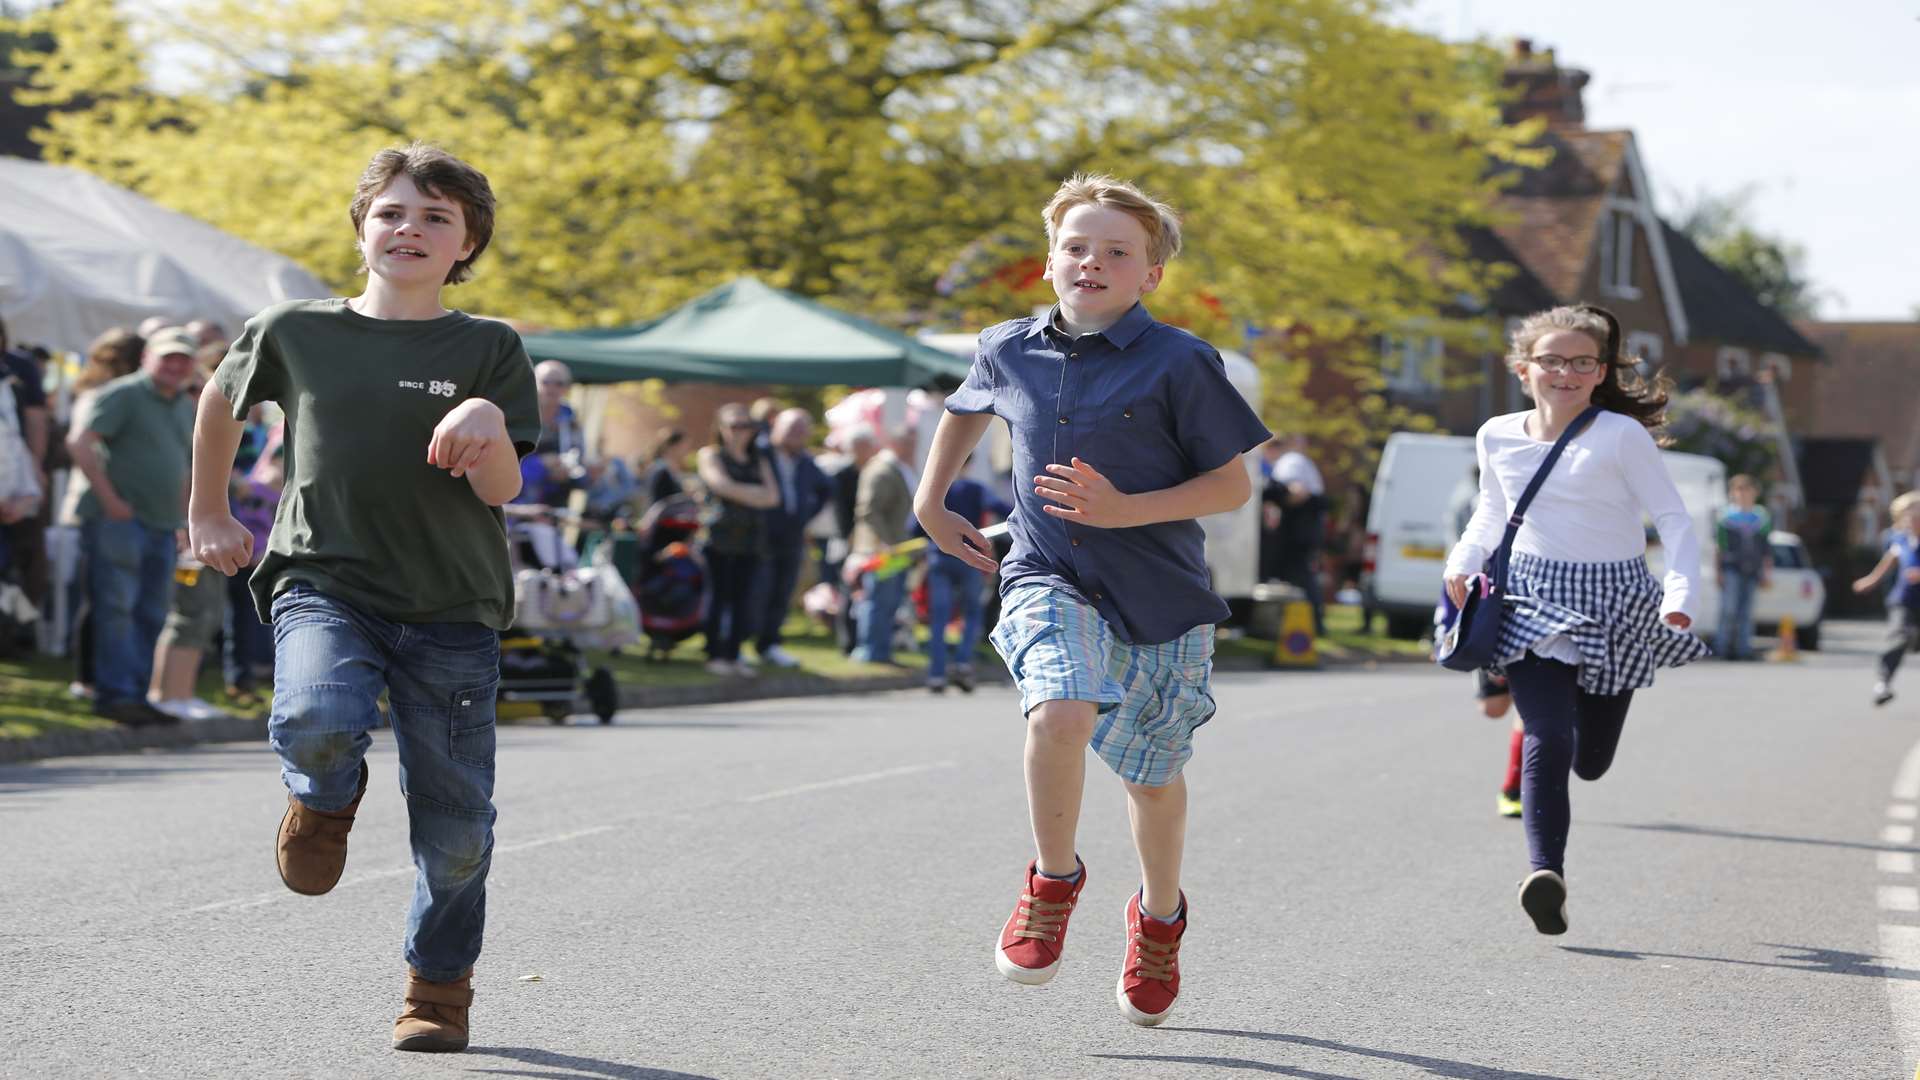 The Offham Dash - part of the fun at the quaint village, near West Malling this weekend